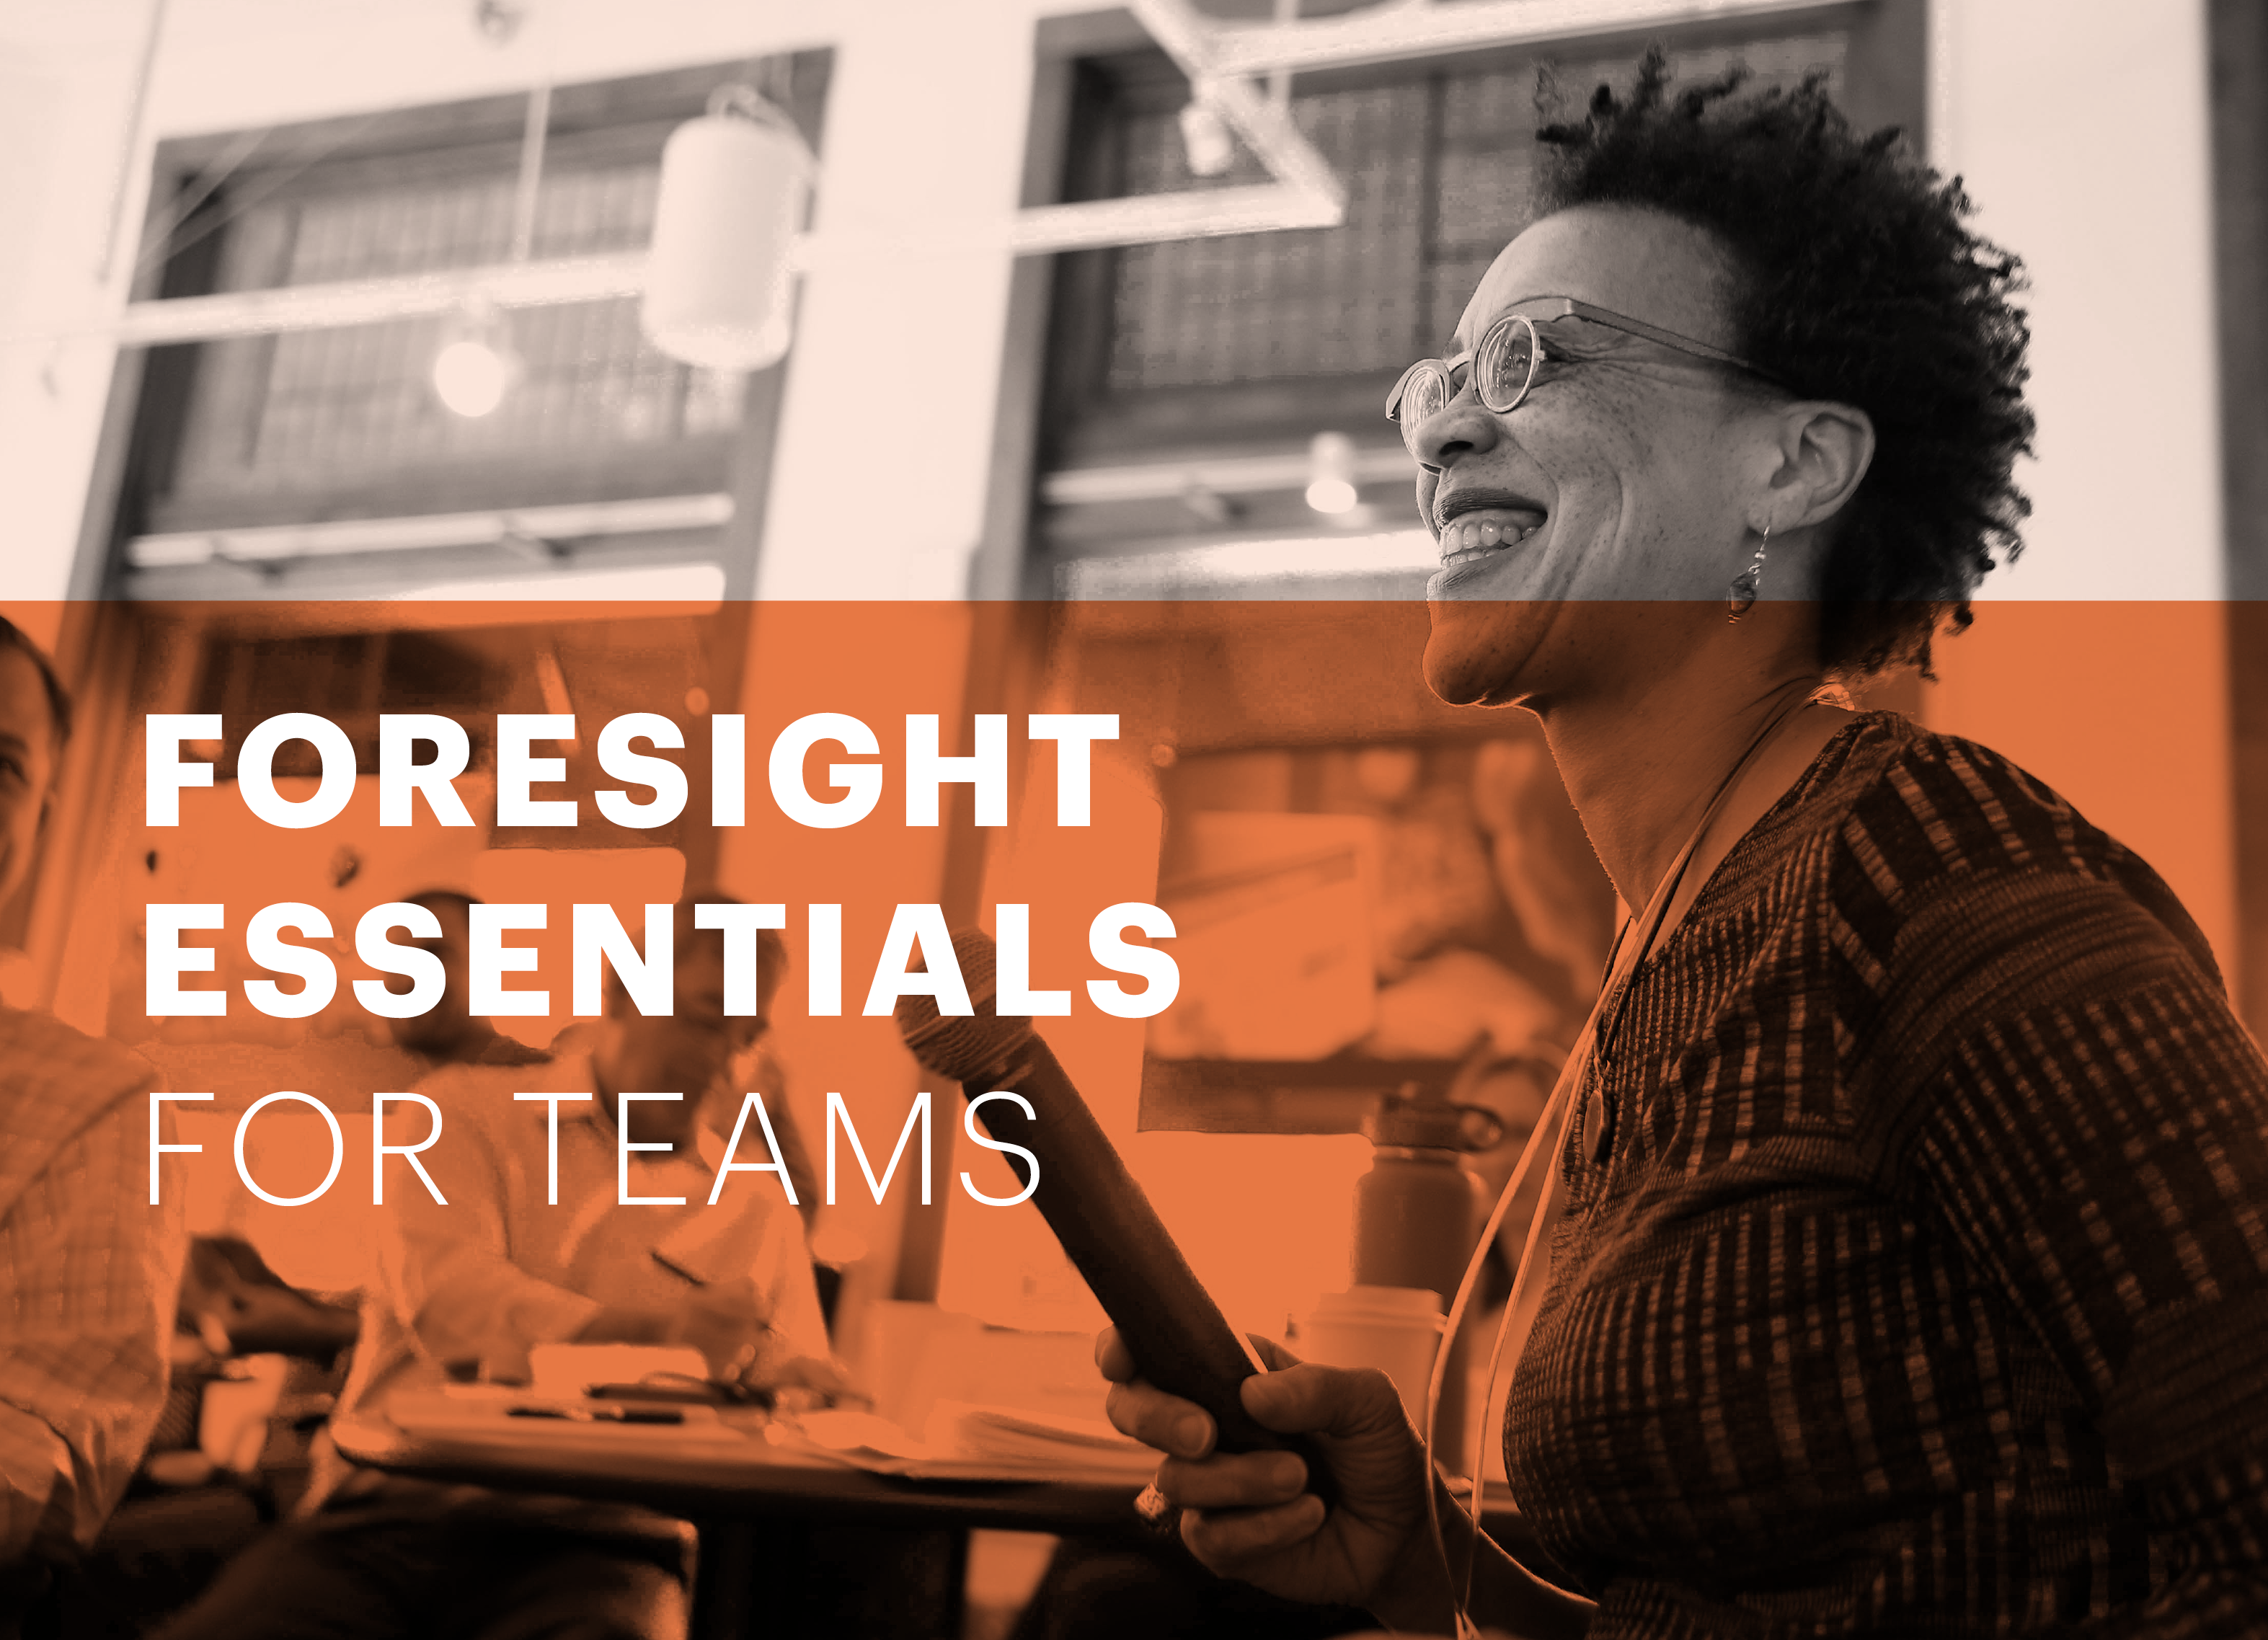 Foresight Essentials for Teams